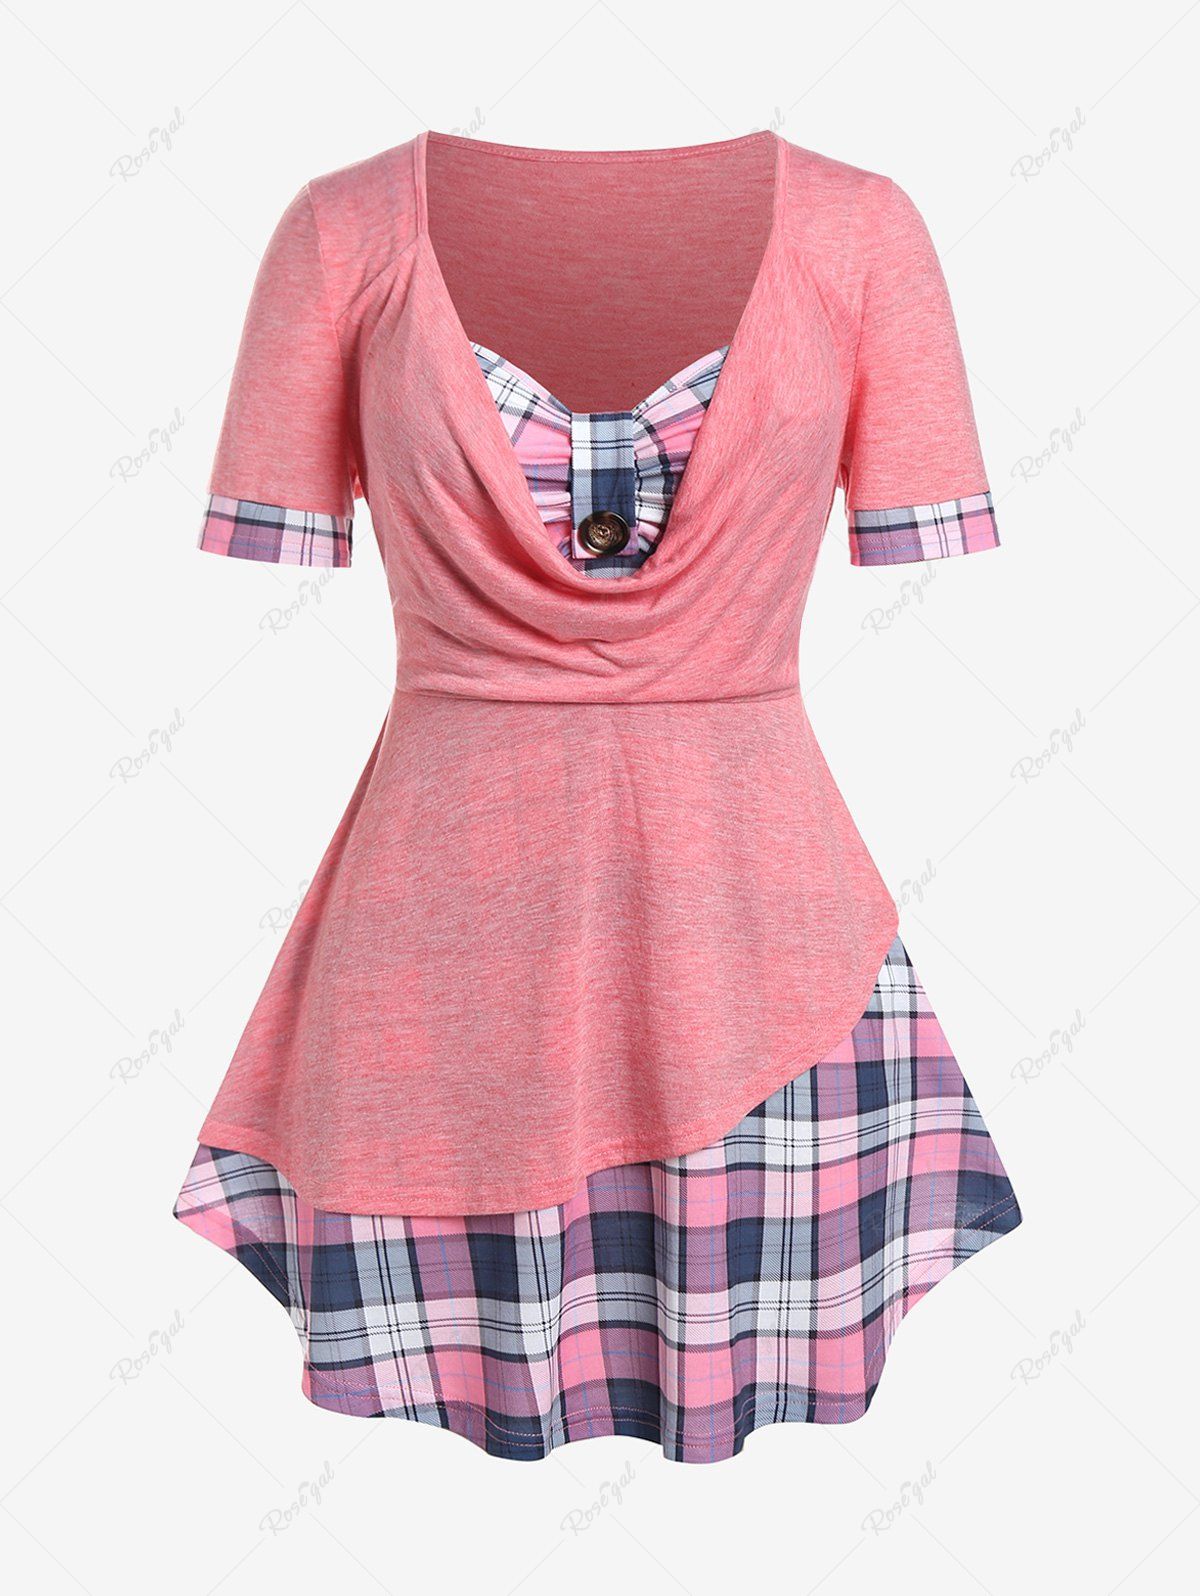 Chic Plus Size Cowl Neck Plaid 2 in 1 Tee  